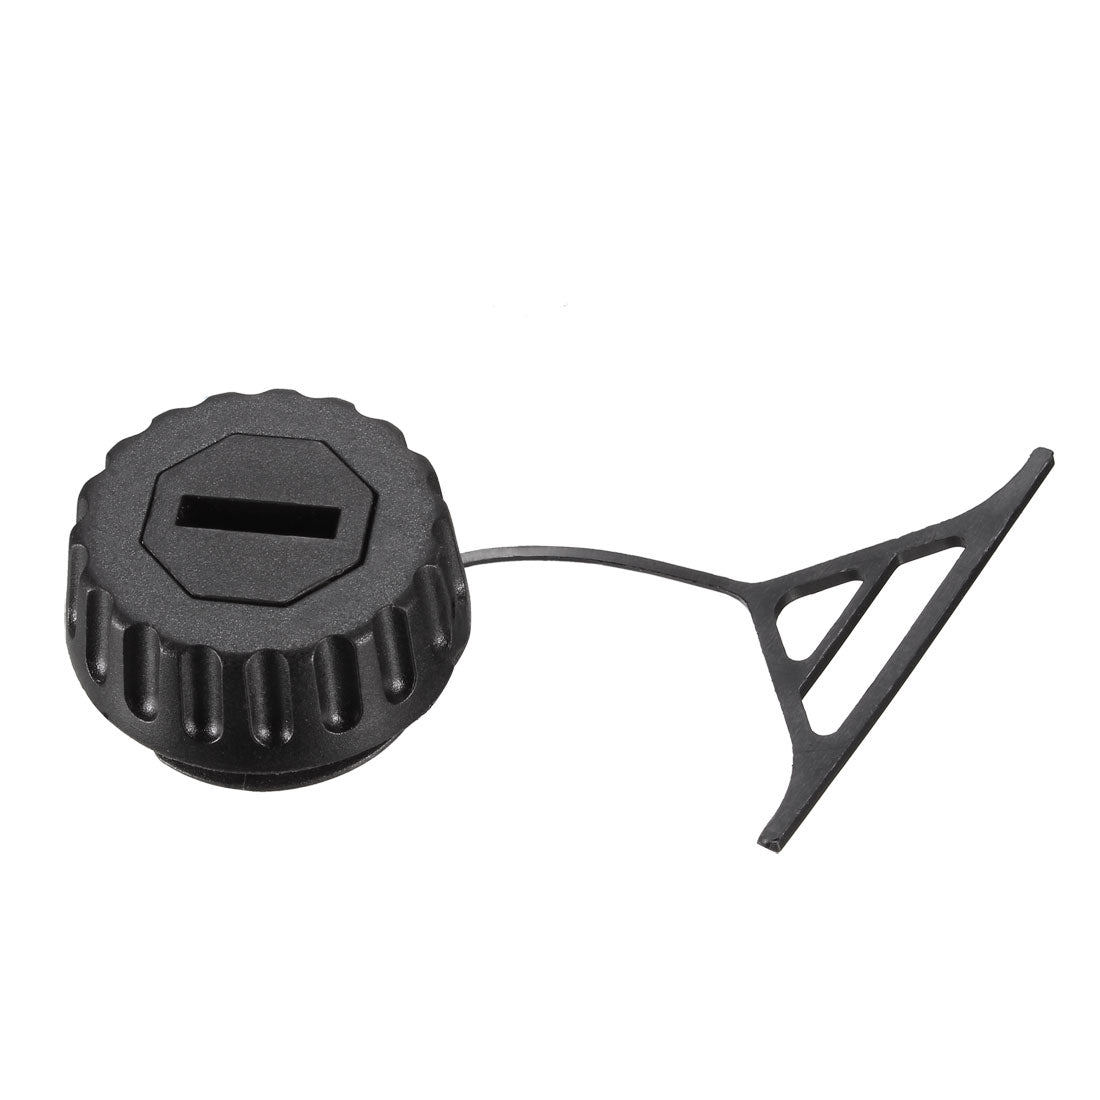 uxcell Uxcell Oil Cap for  Chainsaw 029 039 044 046 050 051 064 066 076 084 088 MS290 MS310 MS390 MS640 MS650 MS660